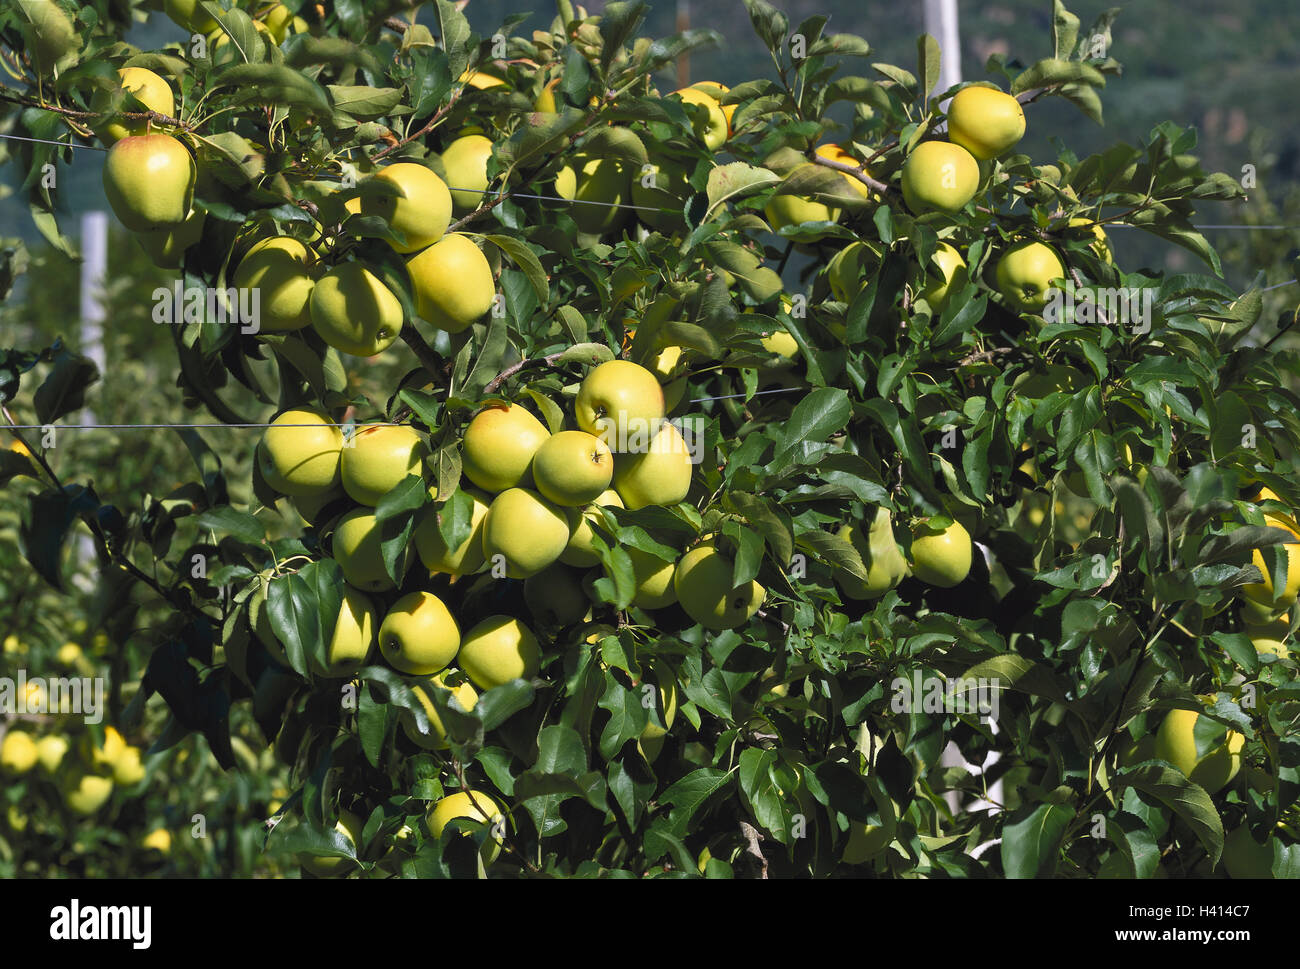 South Tyrolean Weinstrasse, apple-tree, detail, Traminer apples, Europe,  Southern, Europe, Repubblica Italiana, Italy, Northern Italy, South Tyrol,  Alto Adige, fruit-trees, apple-trees, fruit cultivation, cultivation,  agriculture, trees, plantation ...